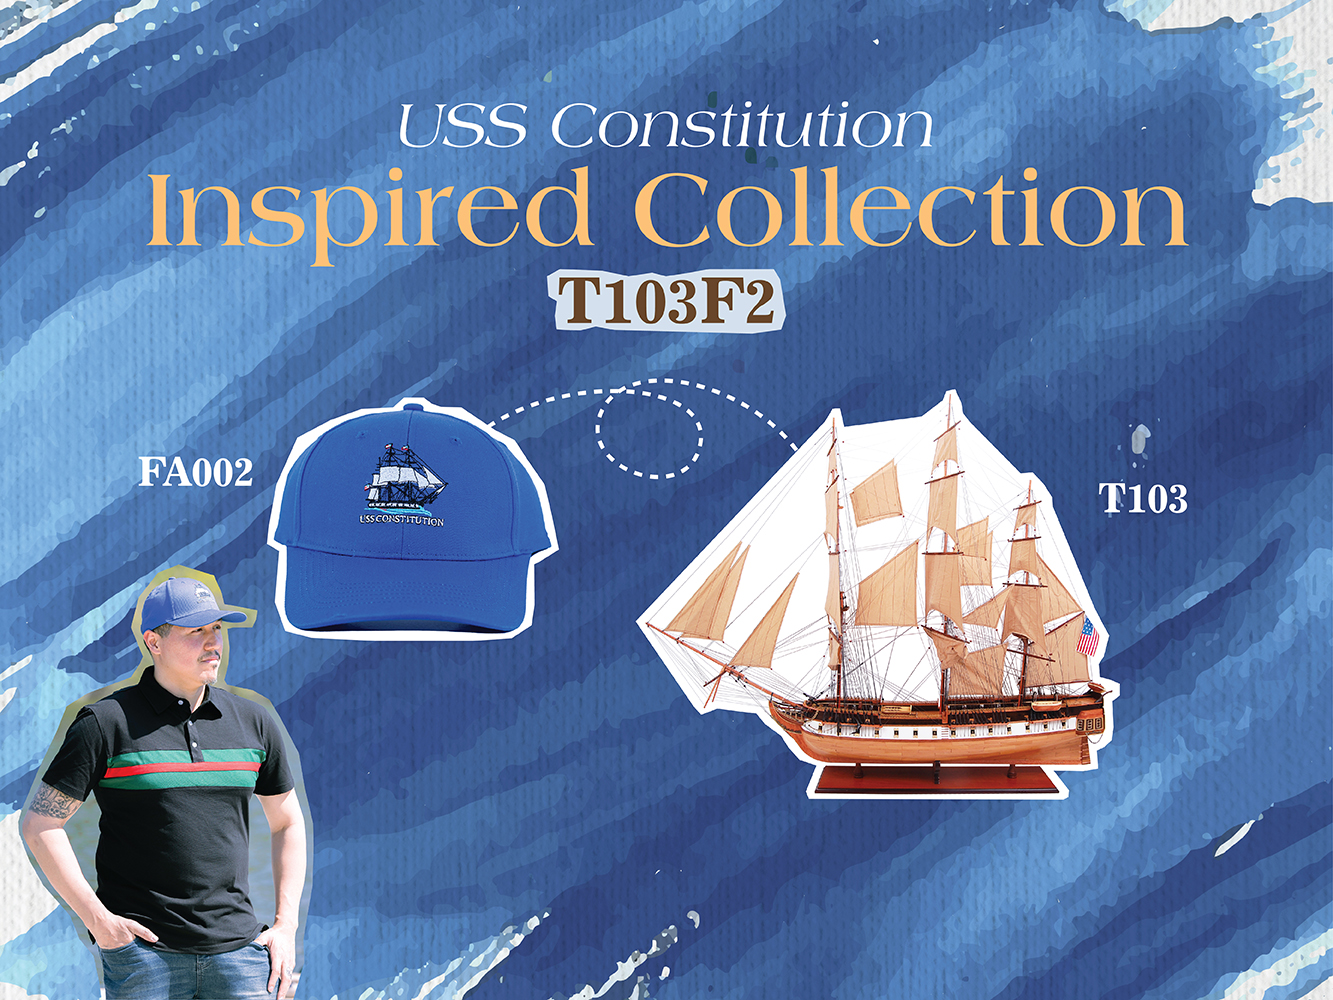 T103F2 Ultimate USS Constitution Combo: A Model Ship and Classic Hat t103f2-ultimate-uss-constitution-combo-a-model-ship-and-classic-hat-l01.jpg